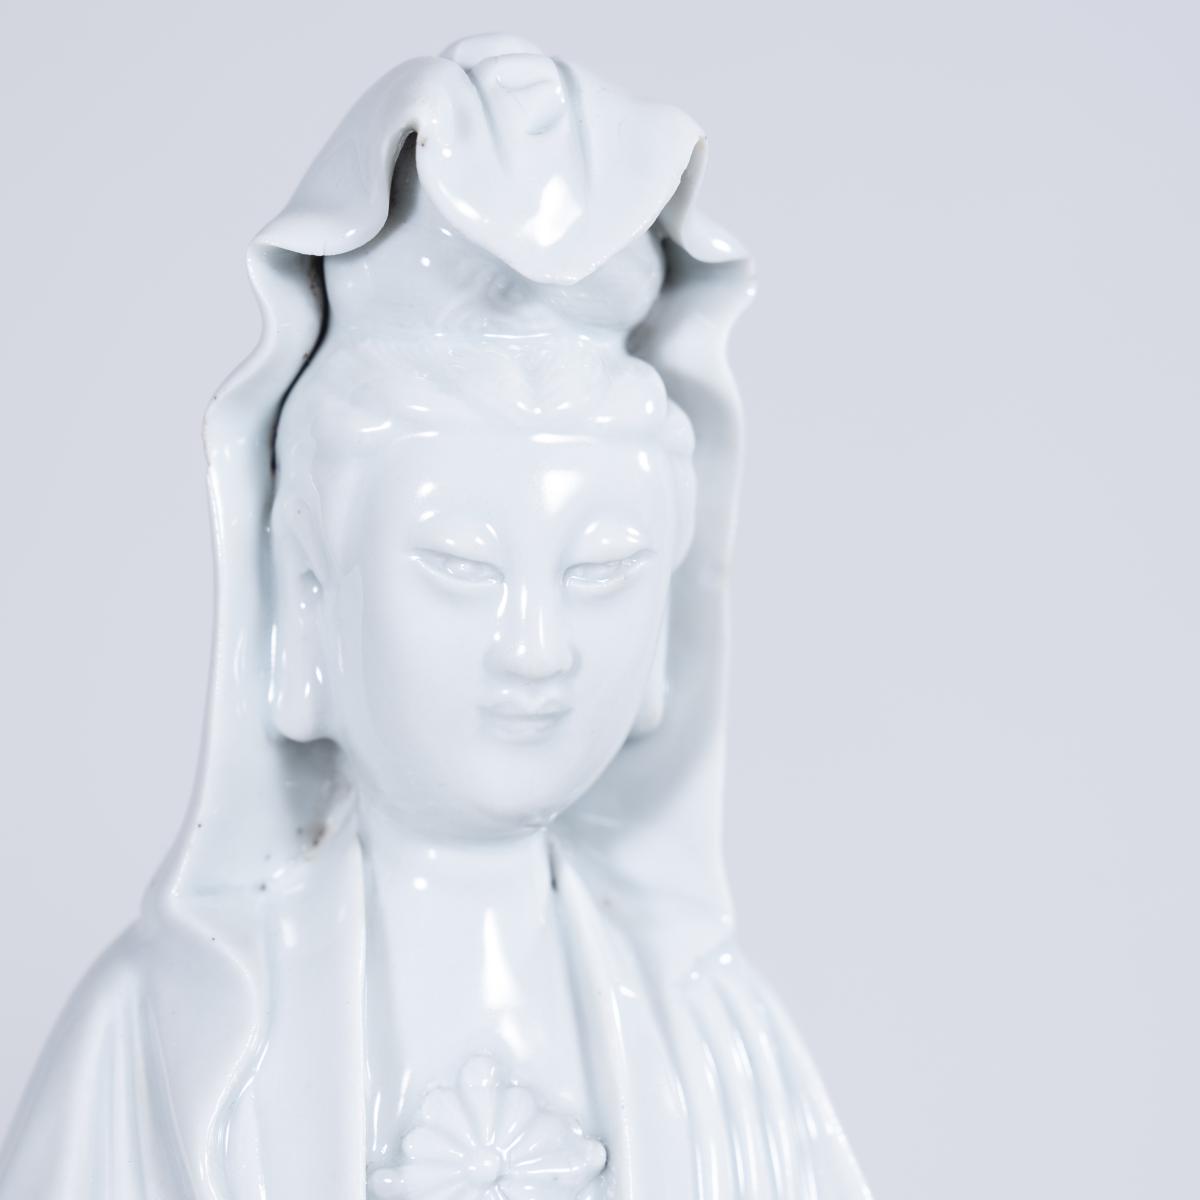 Early 18th Century Pair of Blanc De Chine Guanyin